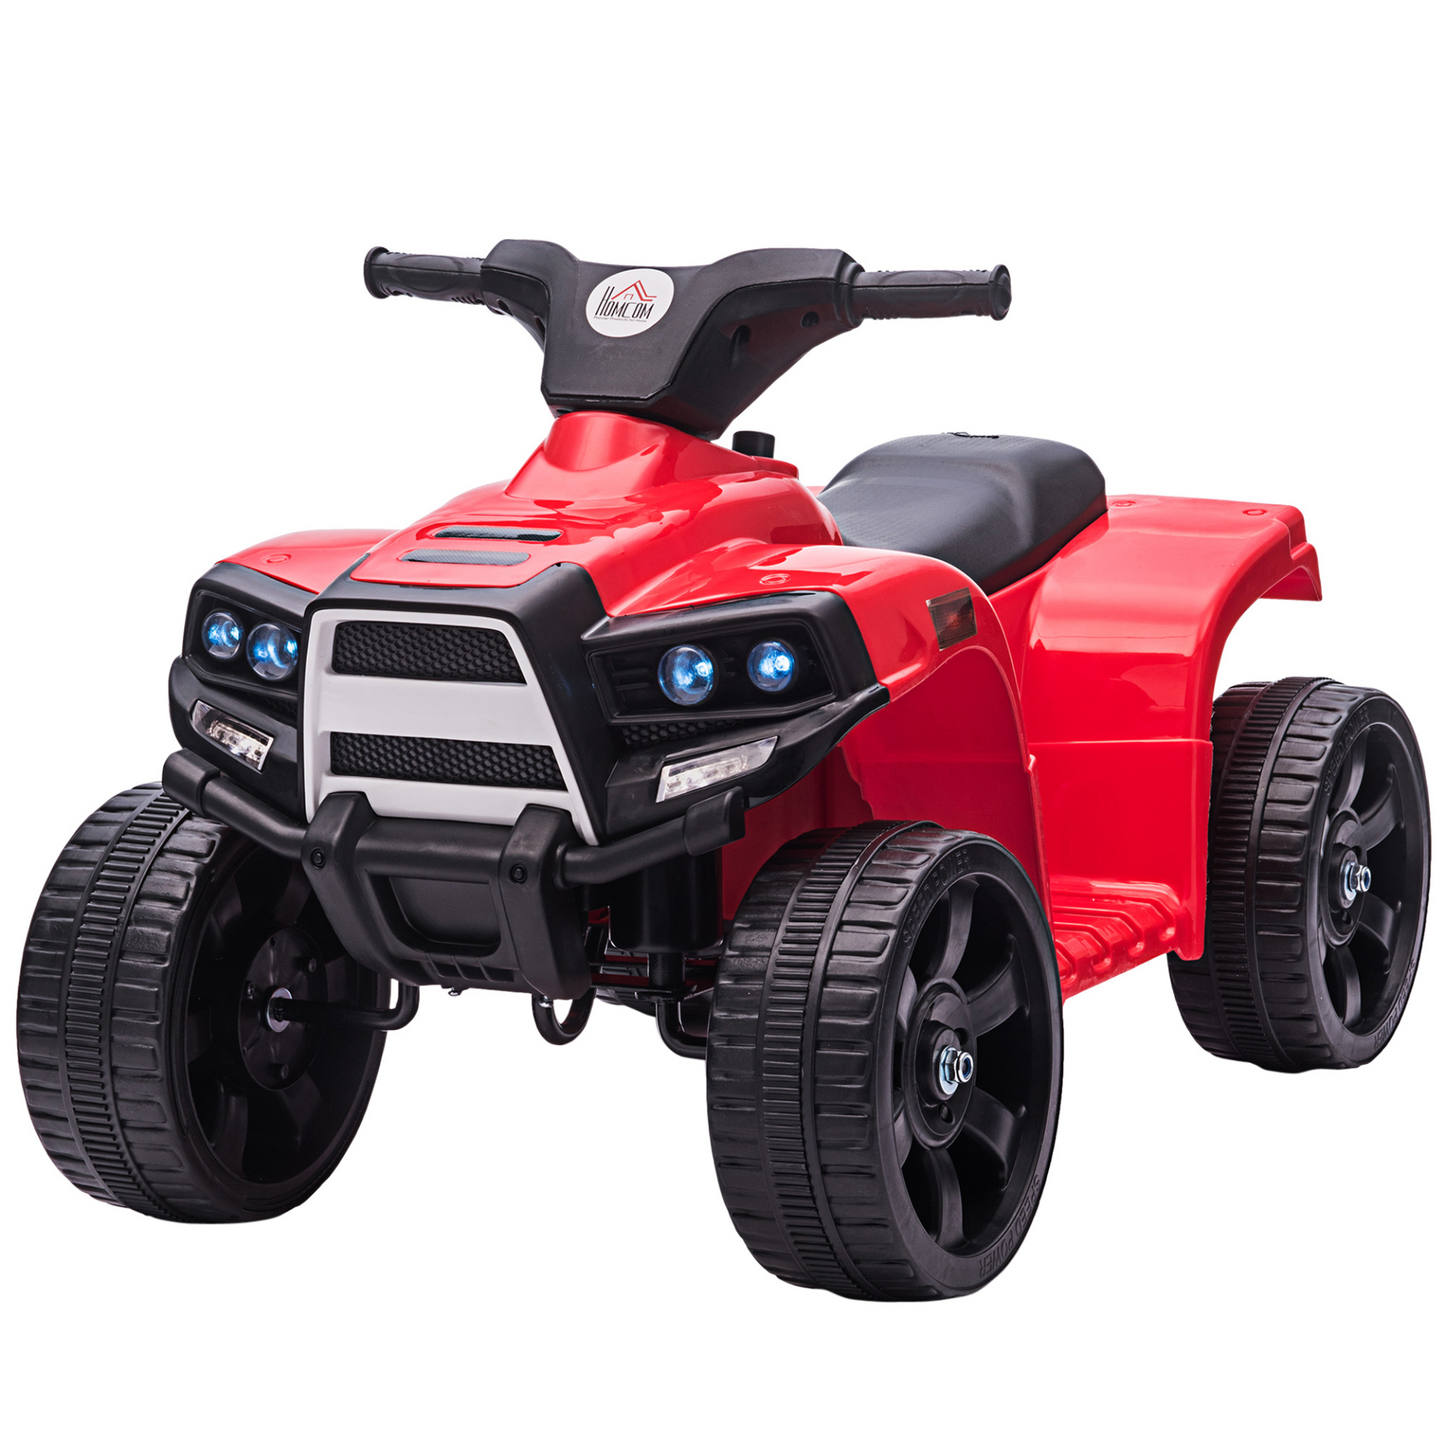 HOMCOM 6V Kids Electric Ride on Car ATV Toy Quad Bike With Headlights for Toddlers 18-36 months Red